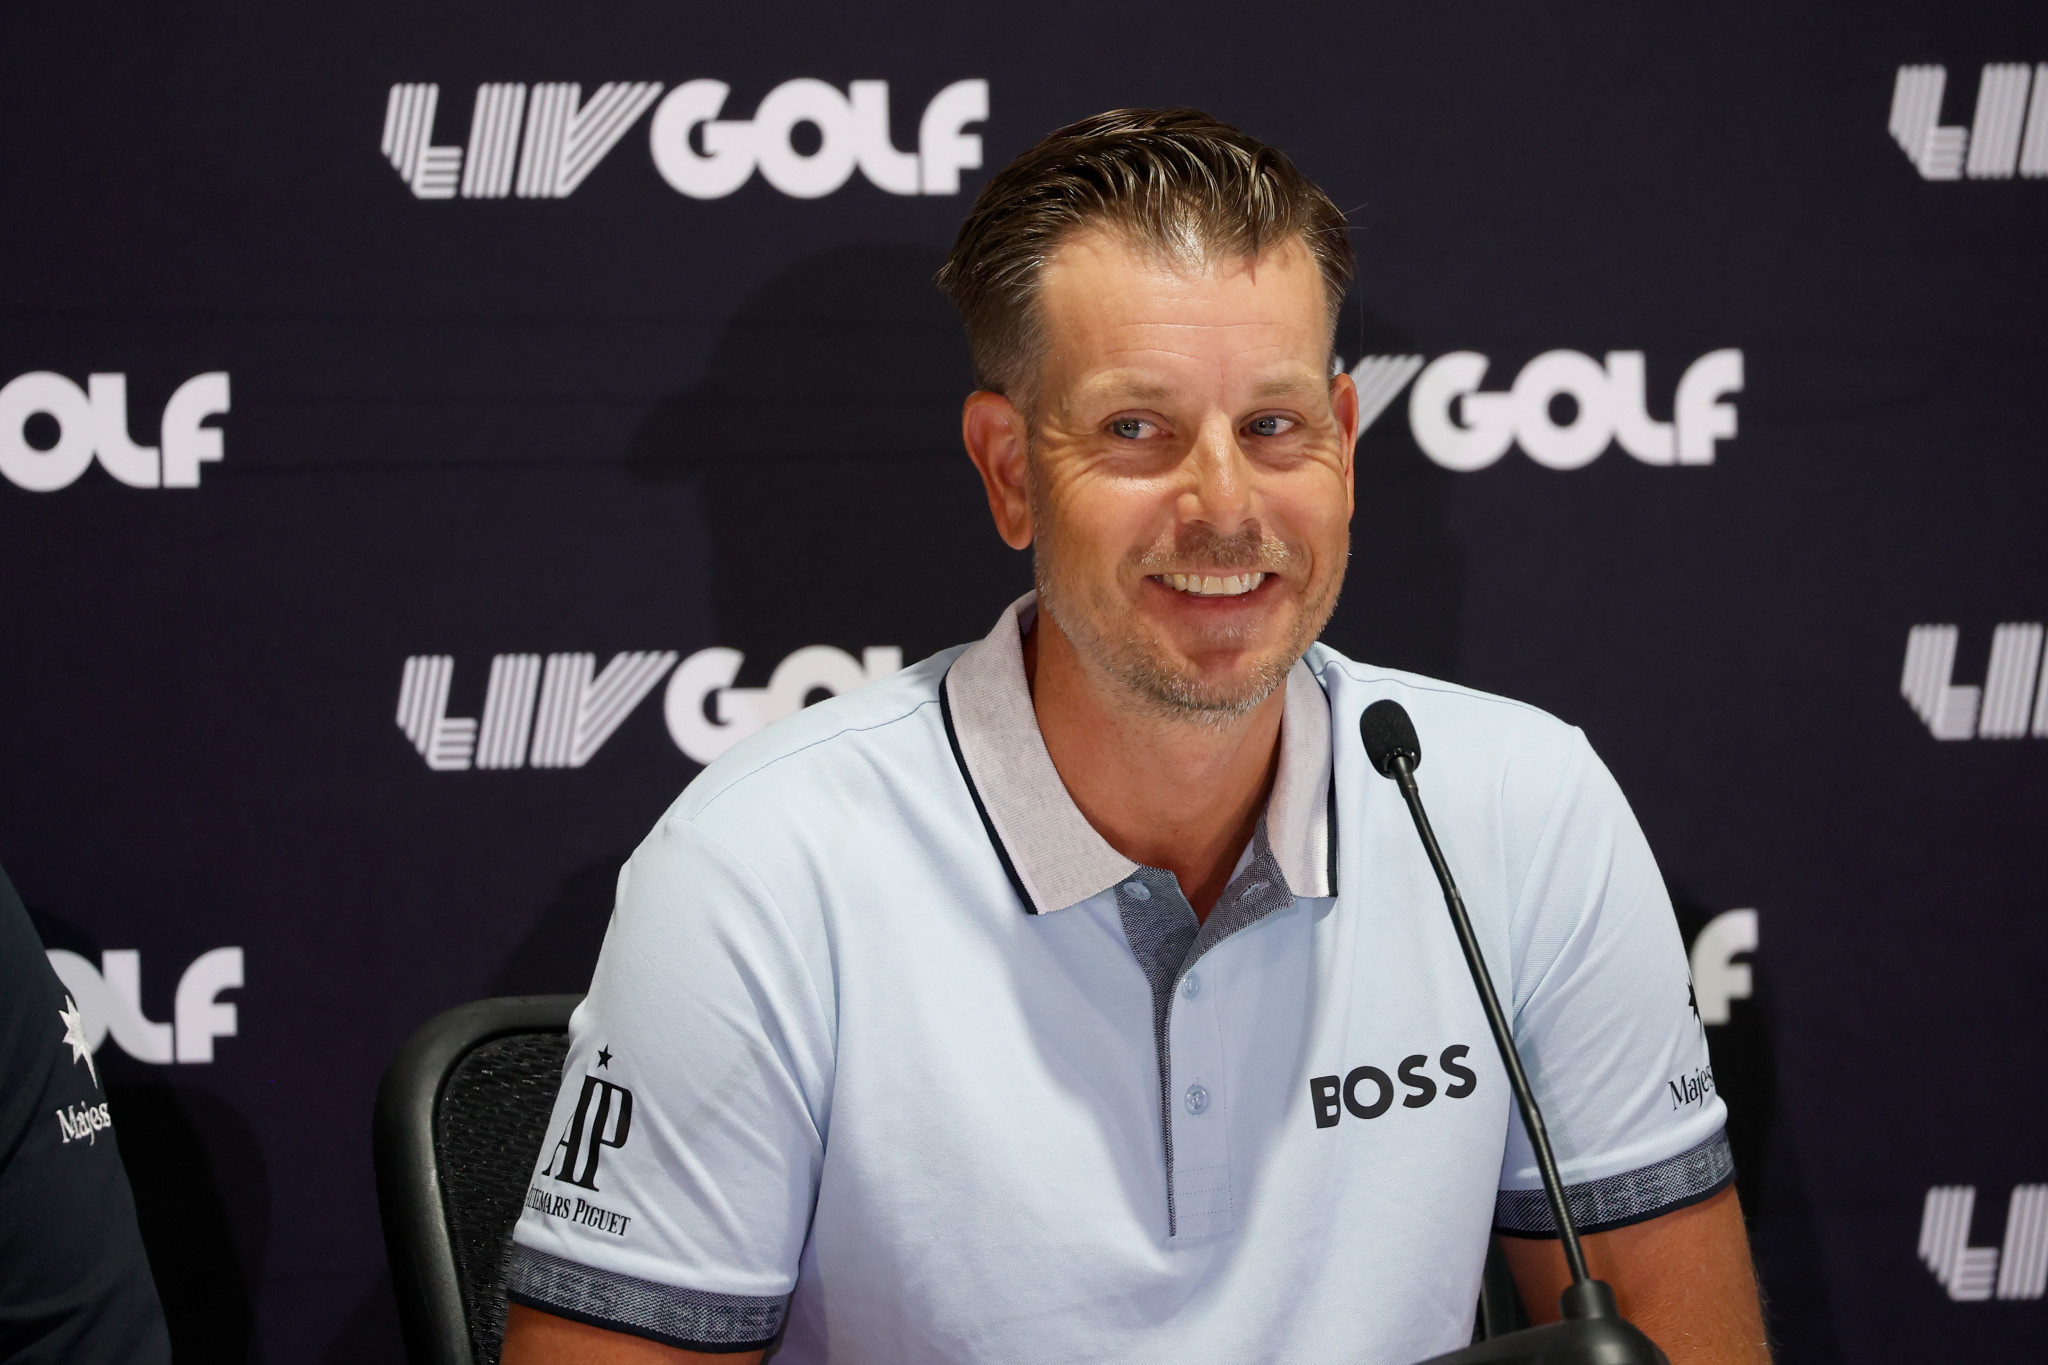 Swede Henrik Stenson - winner of the 2016 Open - was sacked as Europe's next Ryder Cup captain after joining Liv Golf